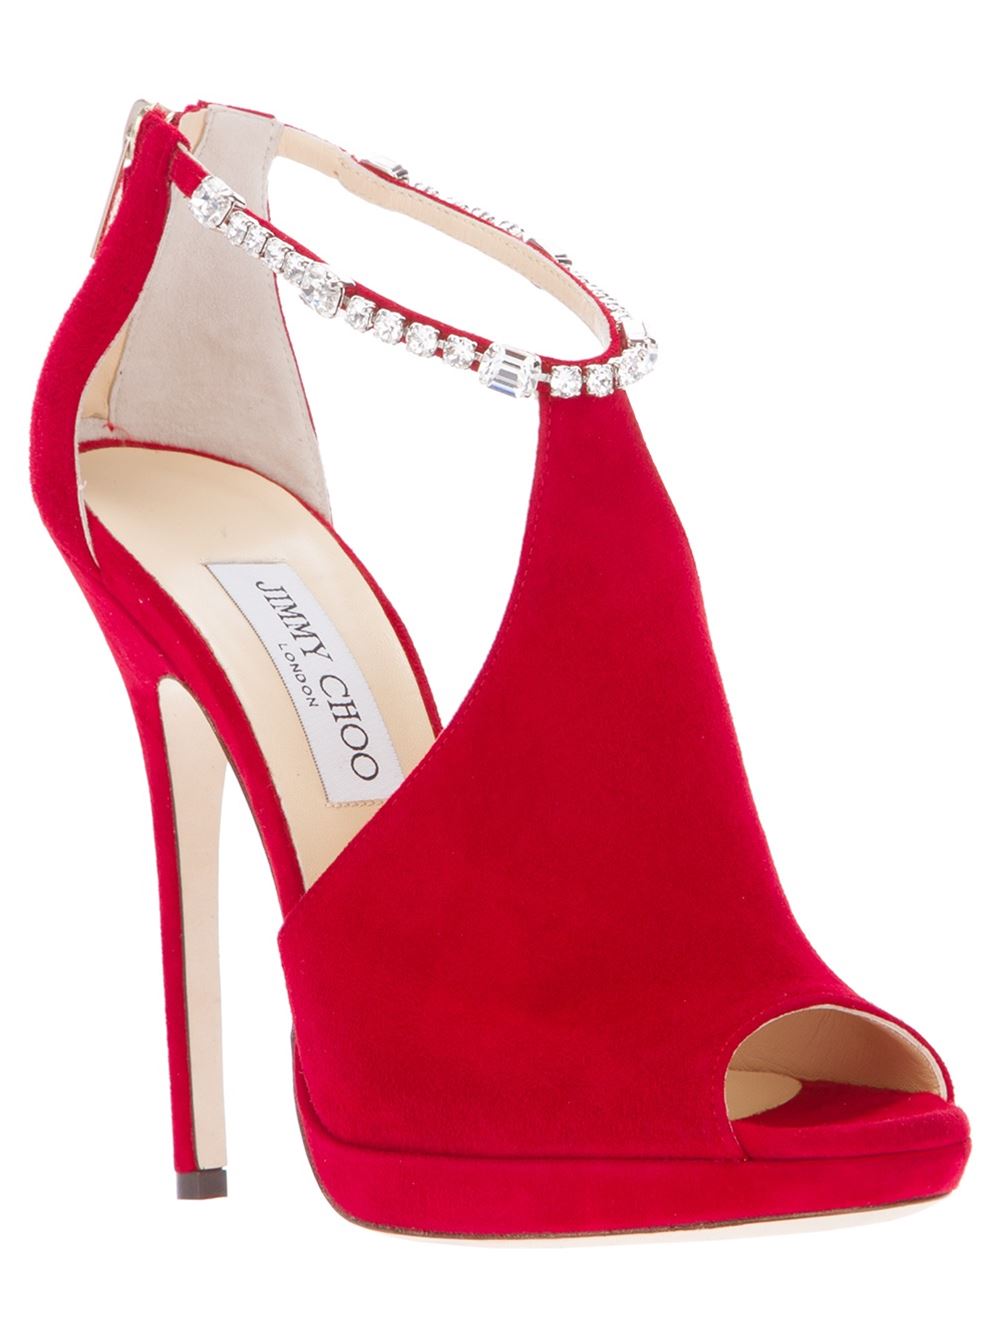 Red calf leather sandals from Jimmy Choo